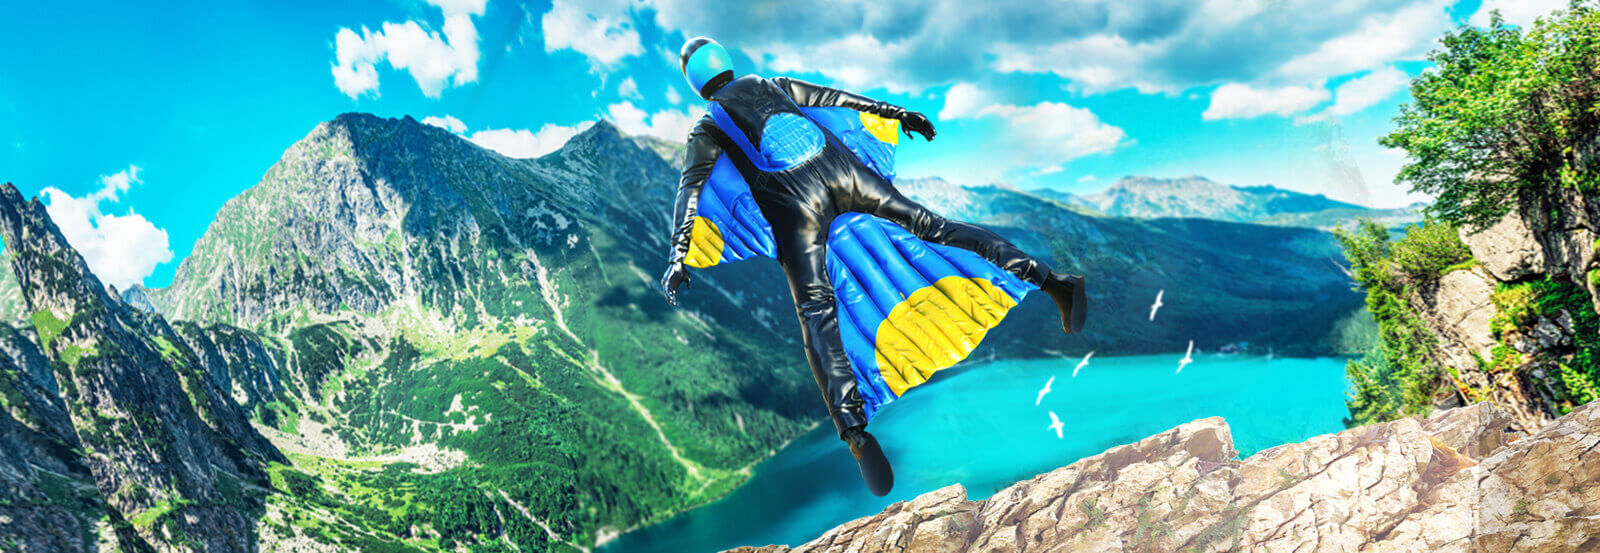 Base jump wing suit flying